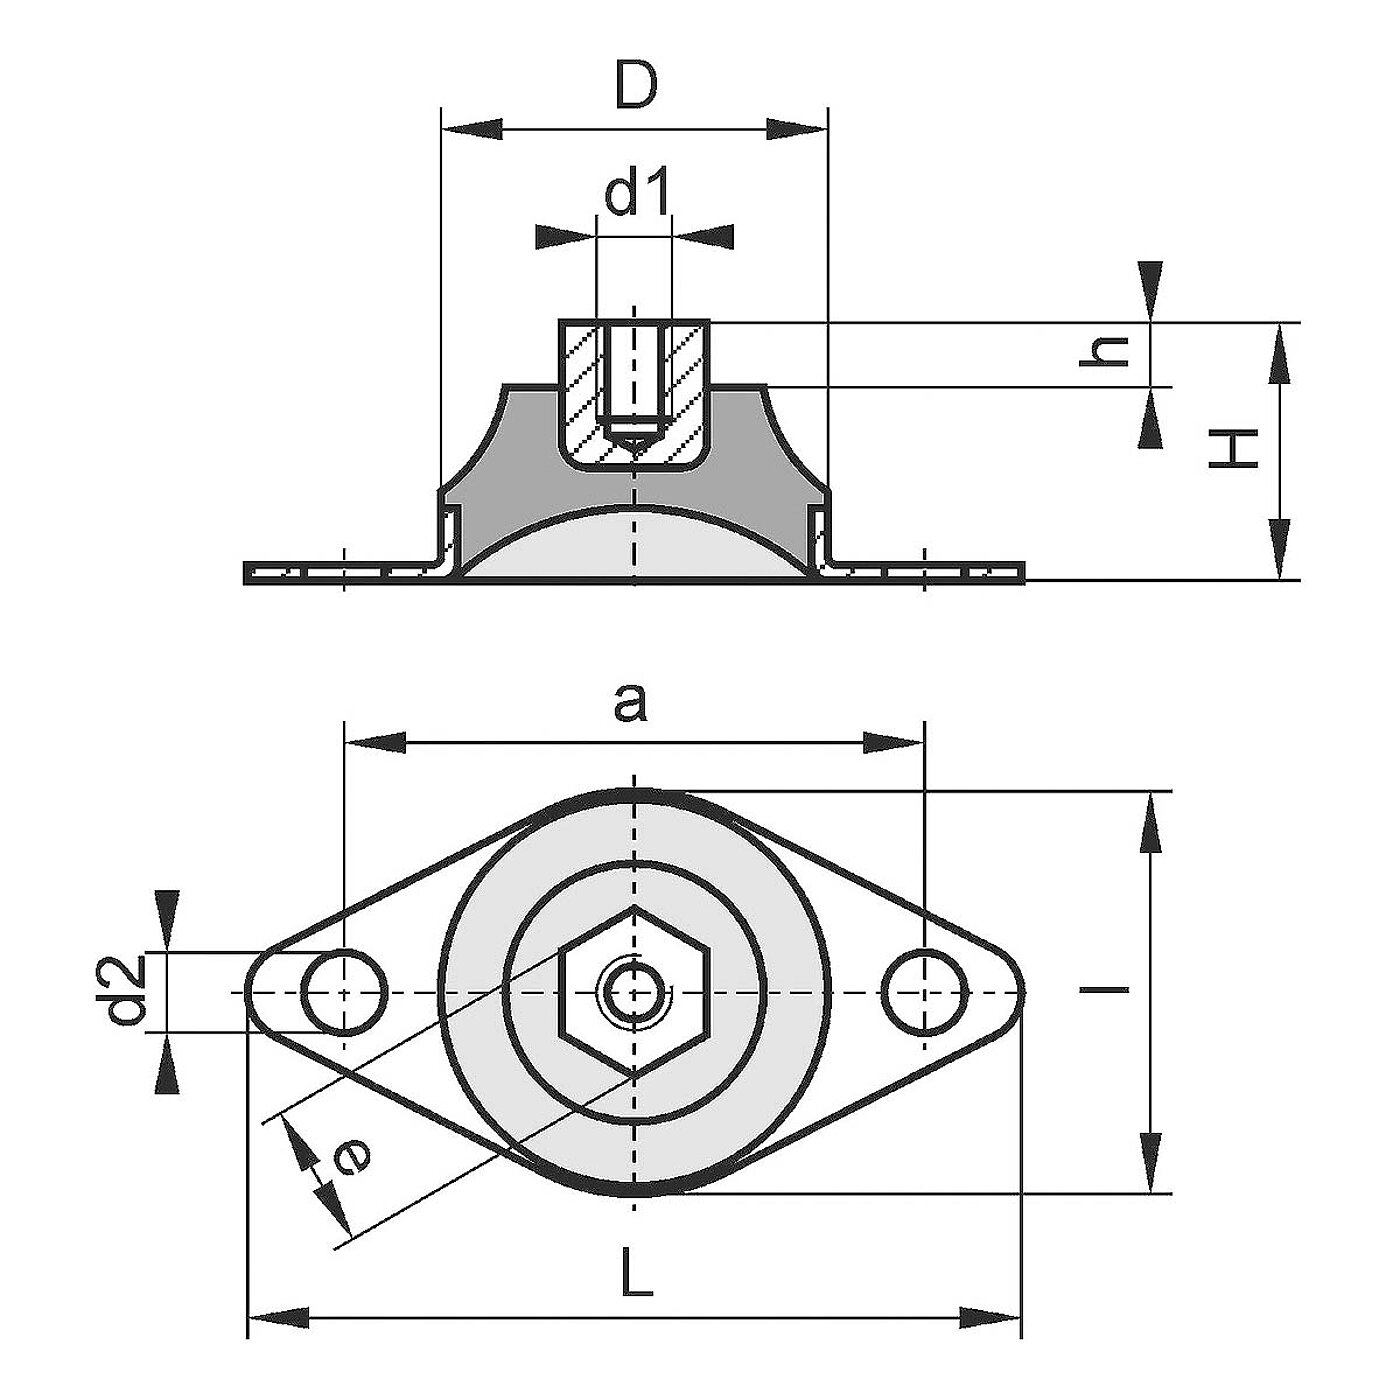 schematic drawing of a rubber-metal cap bearing with bottom plate, threaded insert and elastomer corpus in between